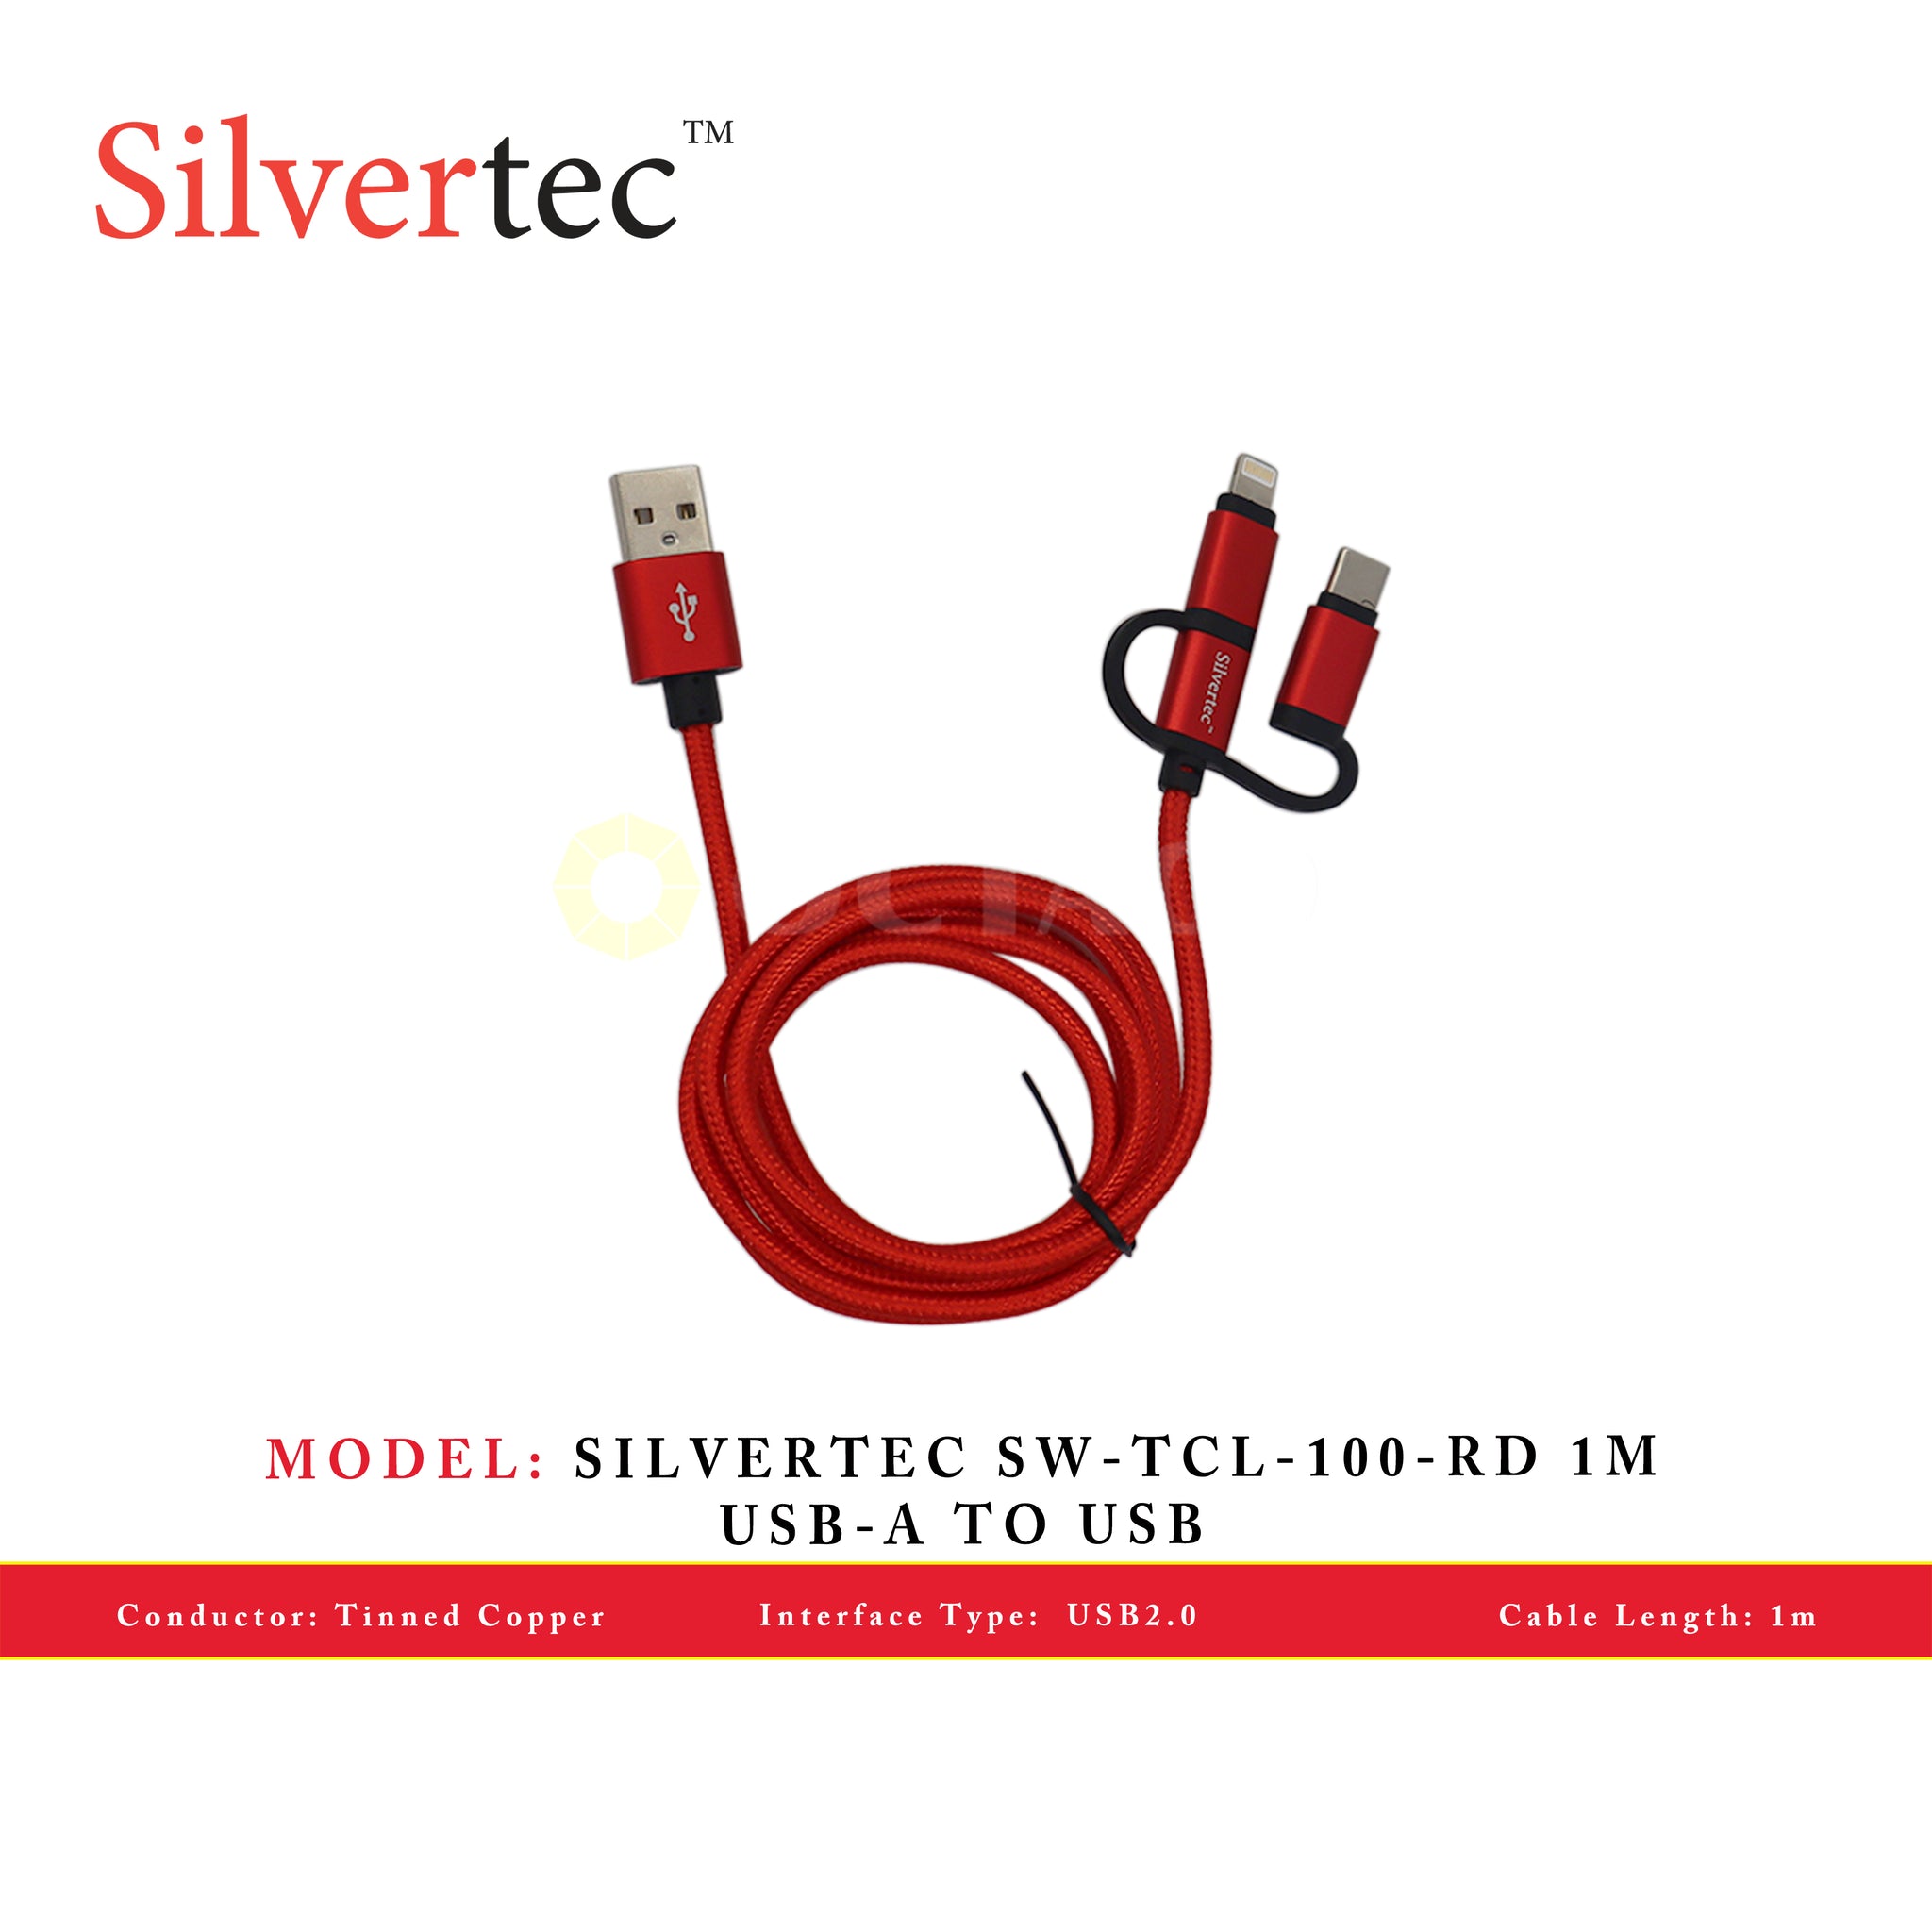 SILVERTEC SW-TCL-100-RD 1M USB-A TO USB